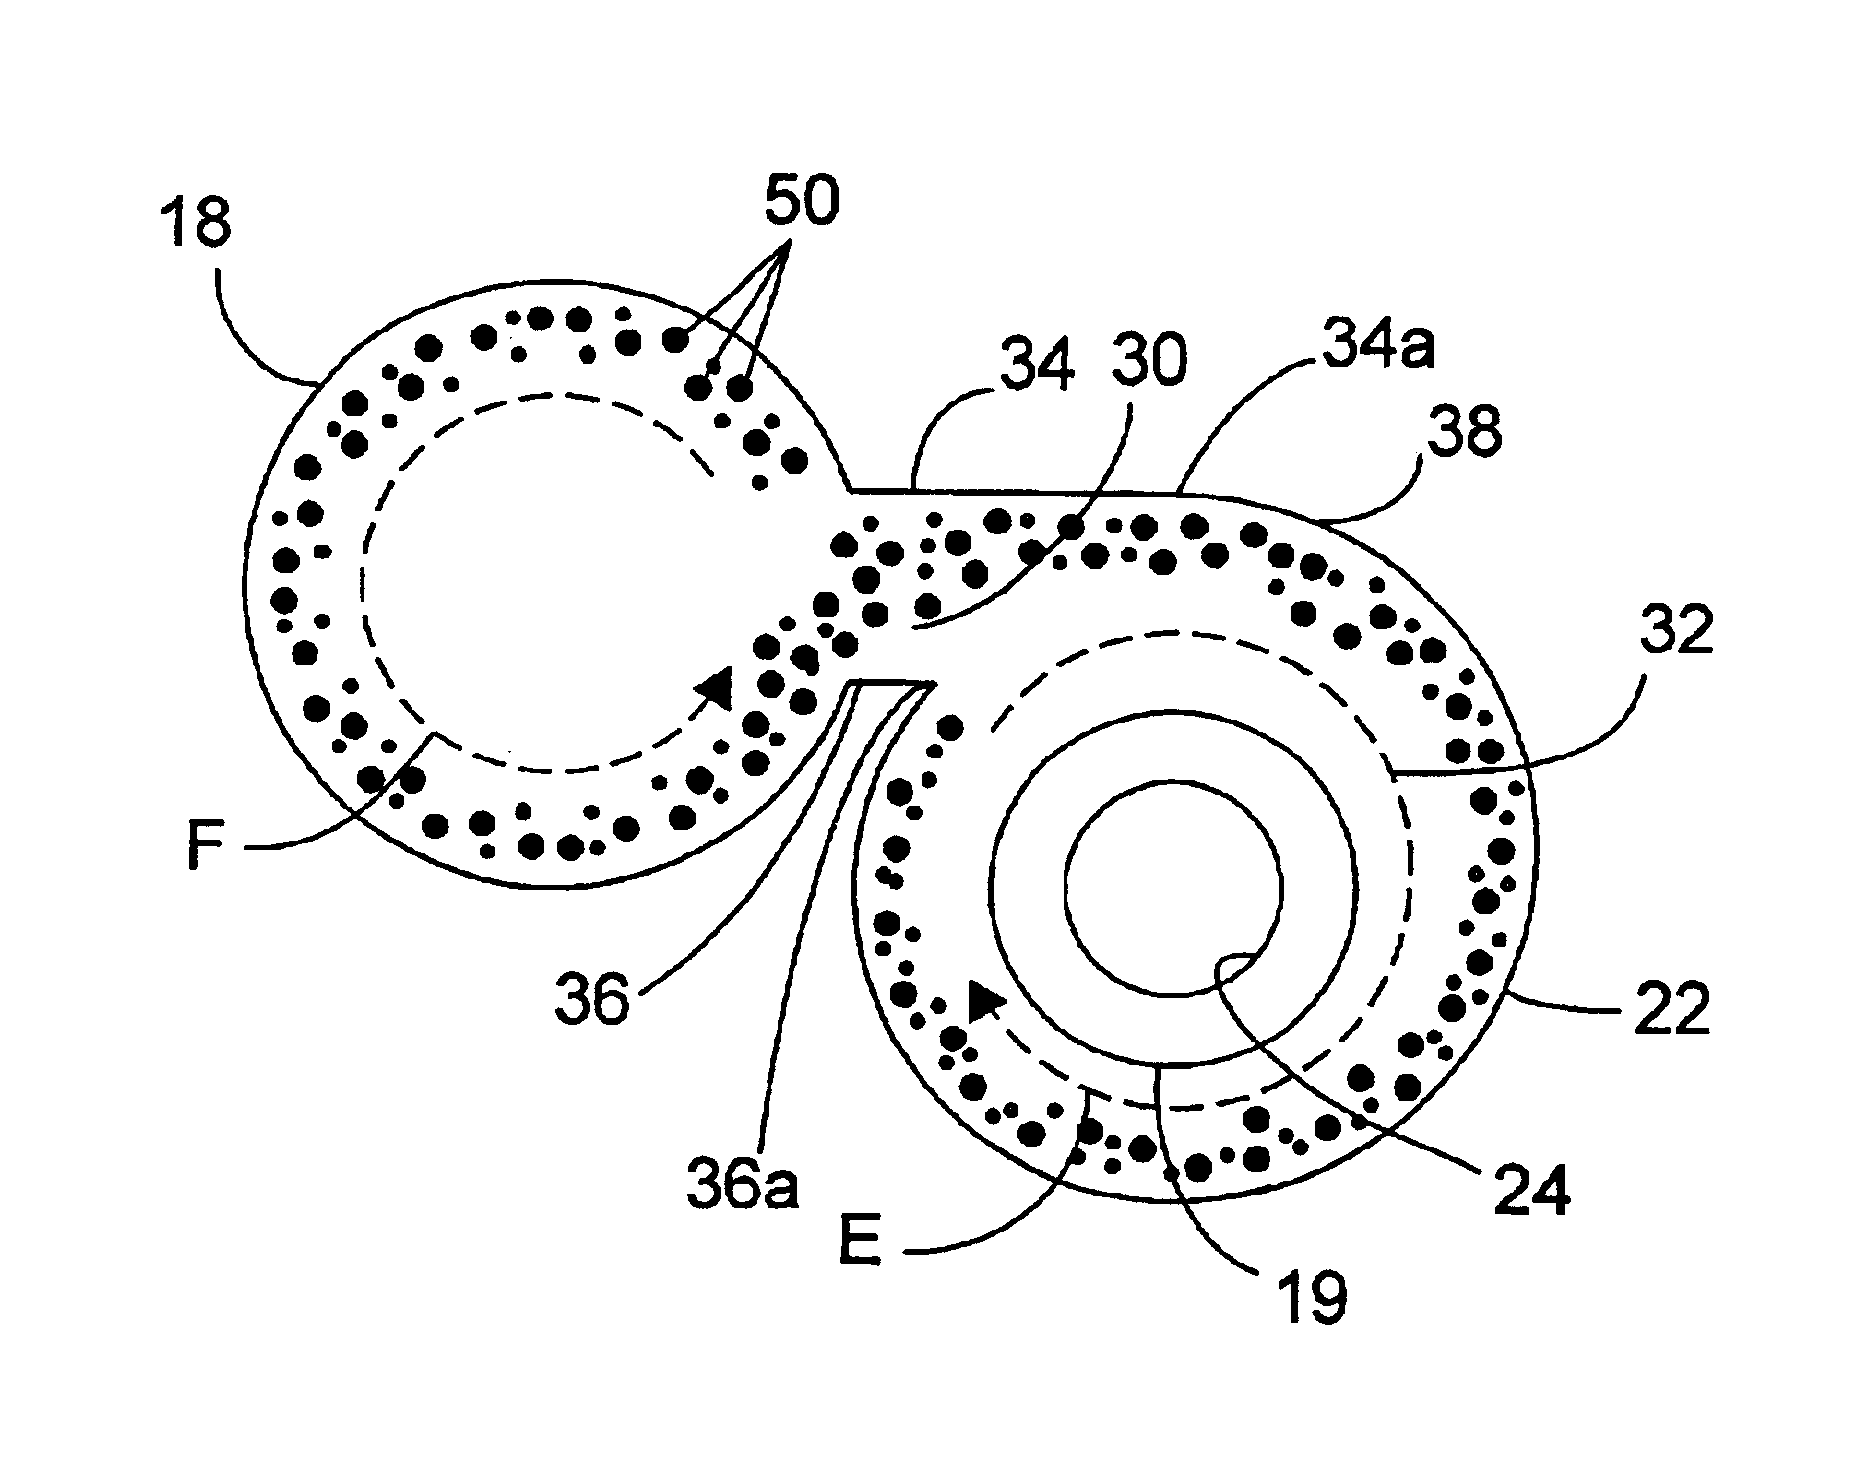 Separation process and apparatus